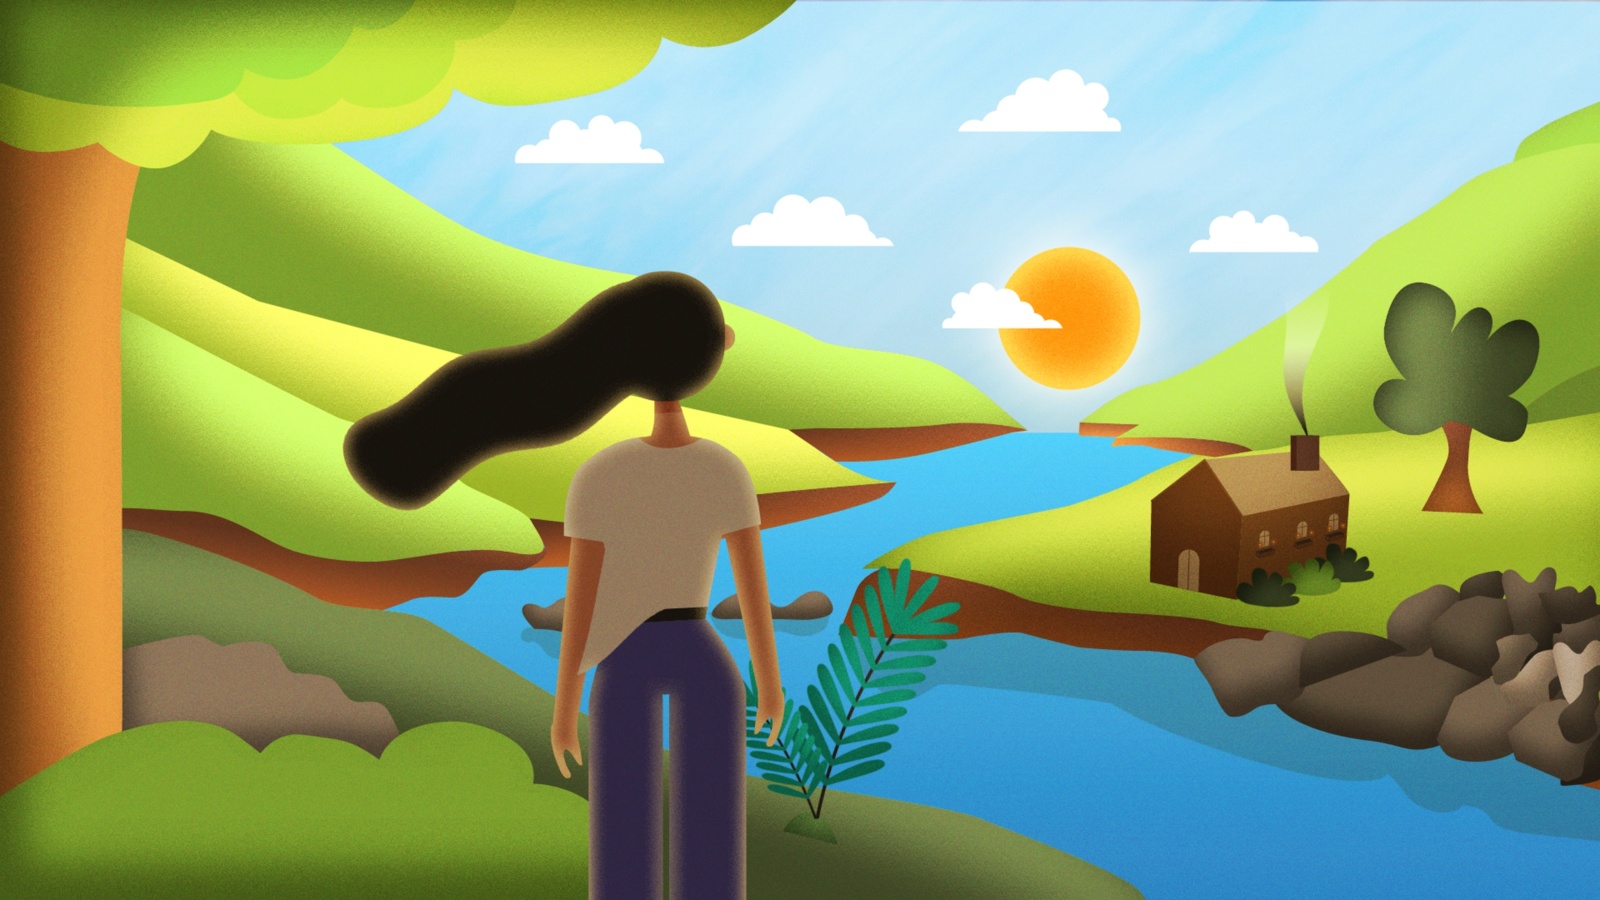 View from behind of woman looking at a river with house on other side graphic with trees and sun